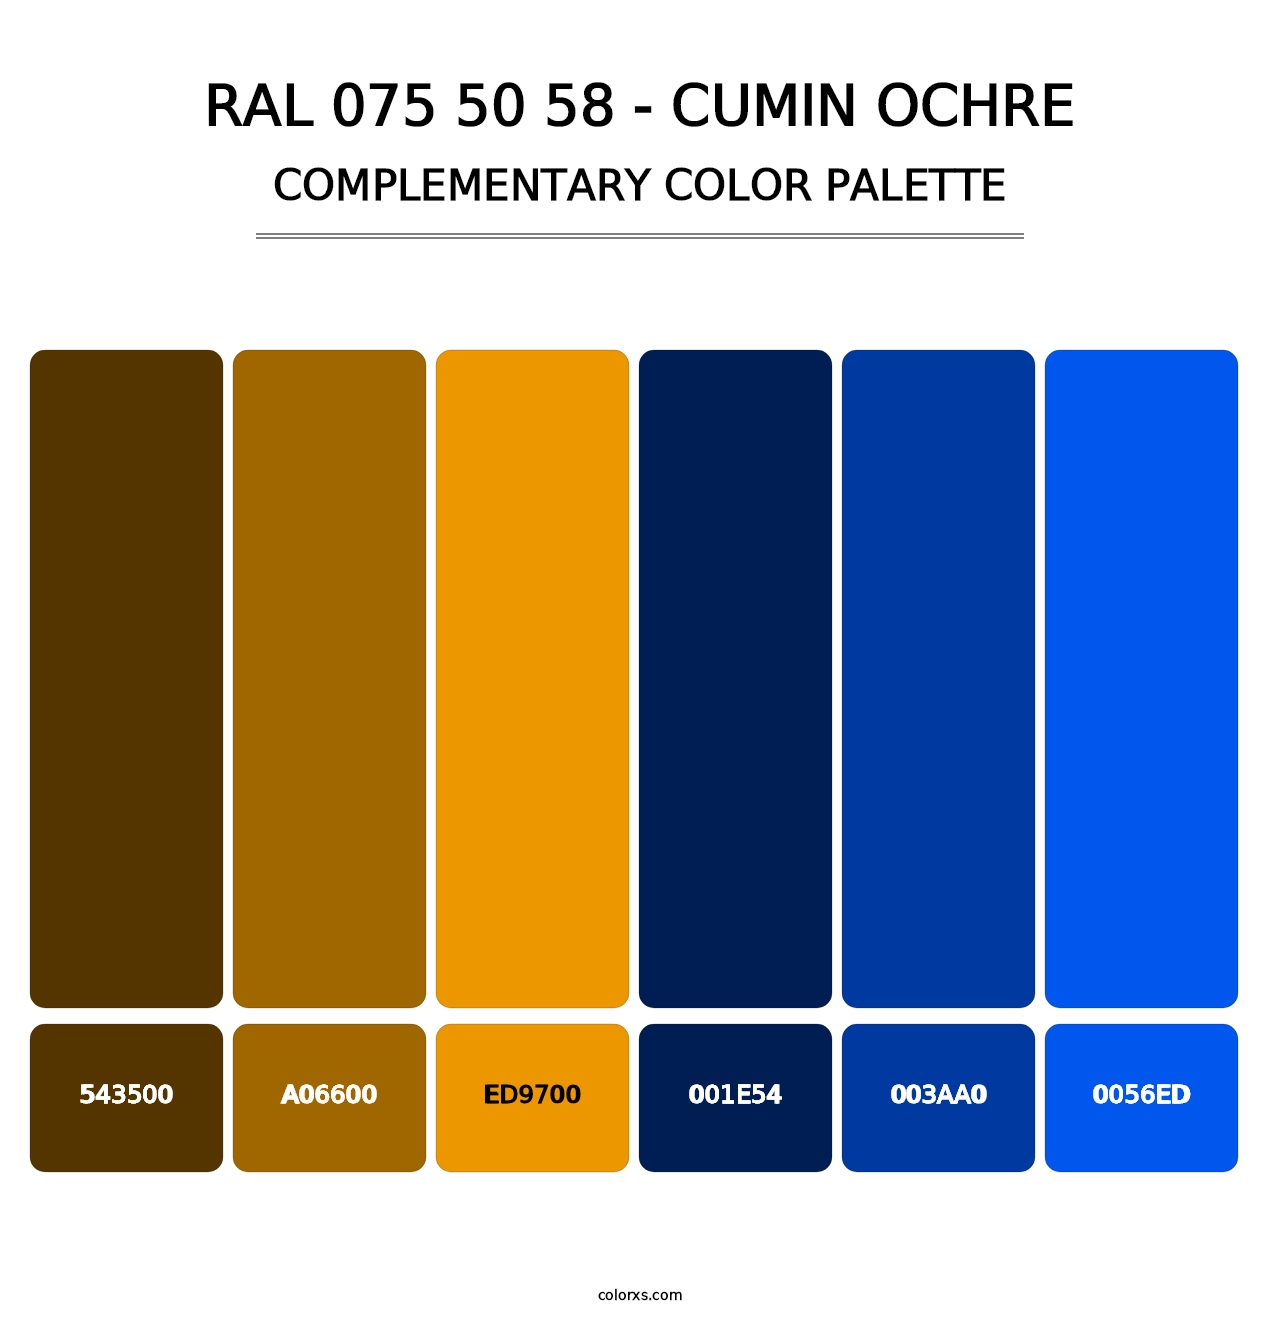 RAL 075 50 58 - Cumin Ochre - Complementary Color Palette